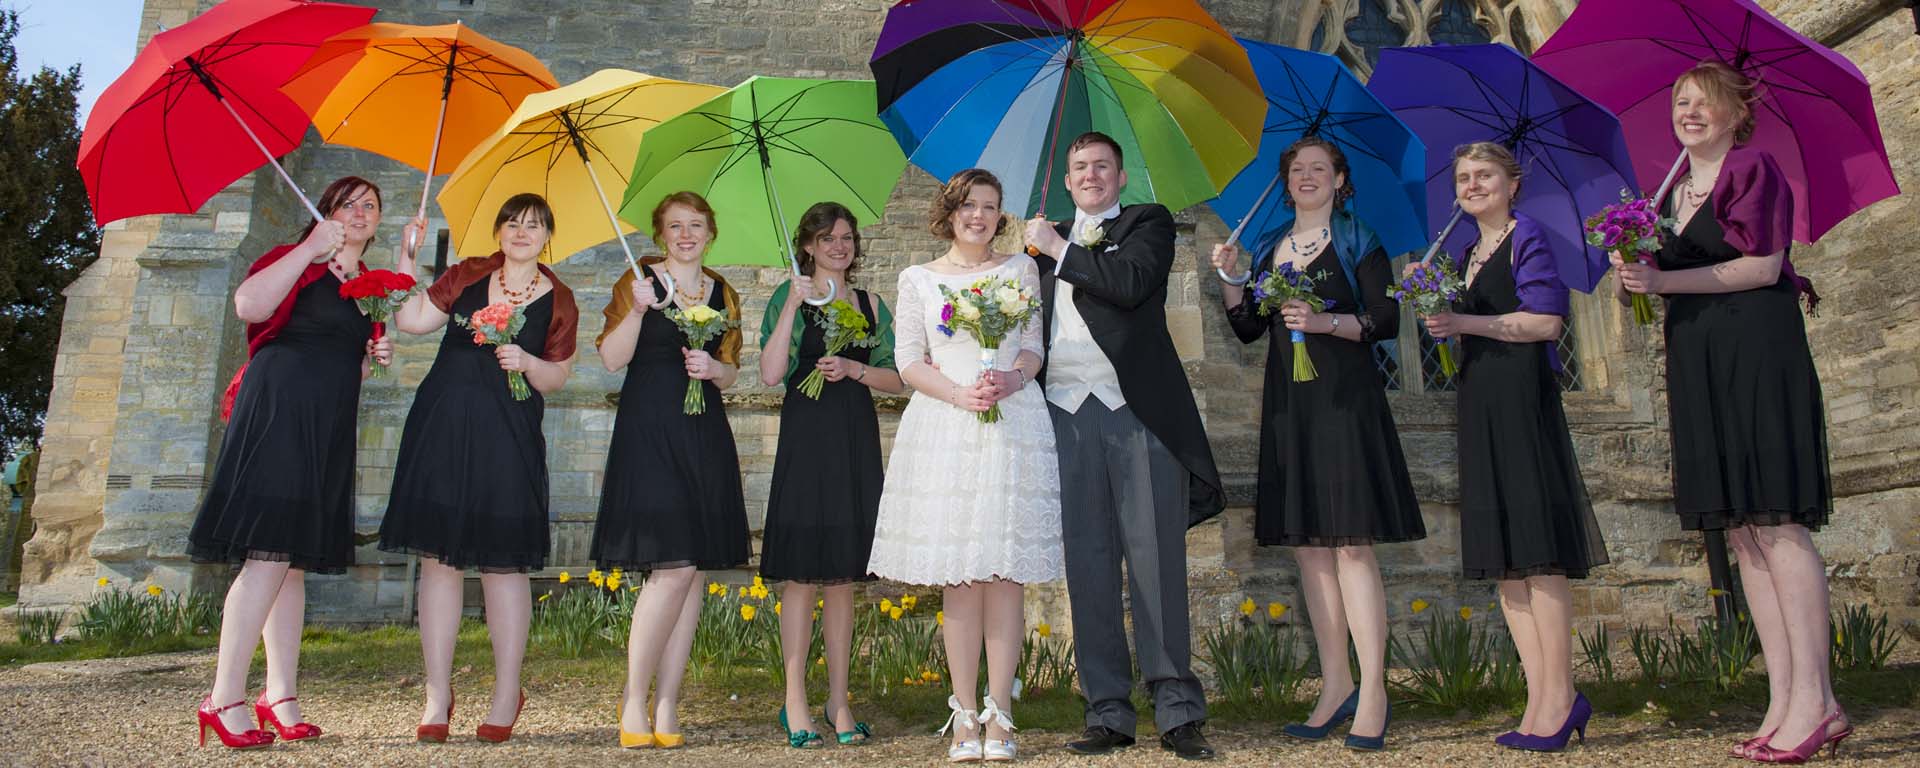 London wedding photographer photography groups guests 162132